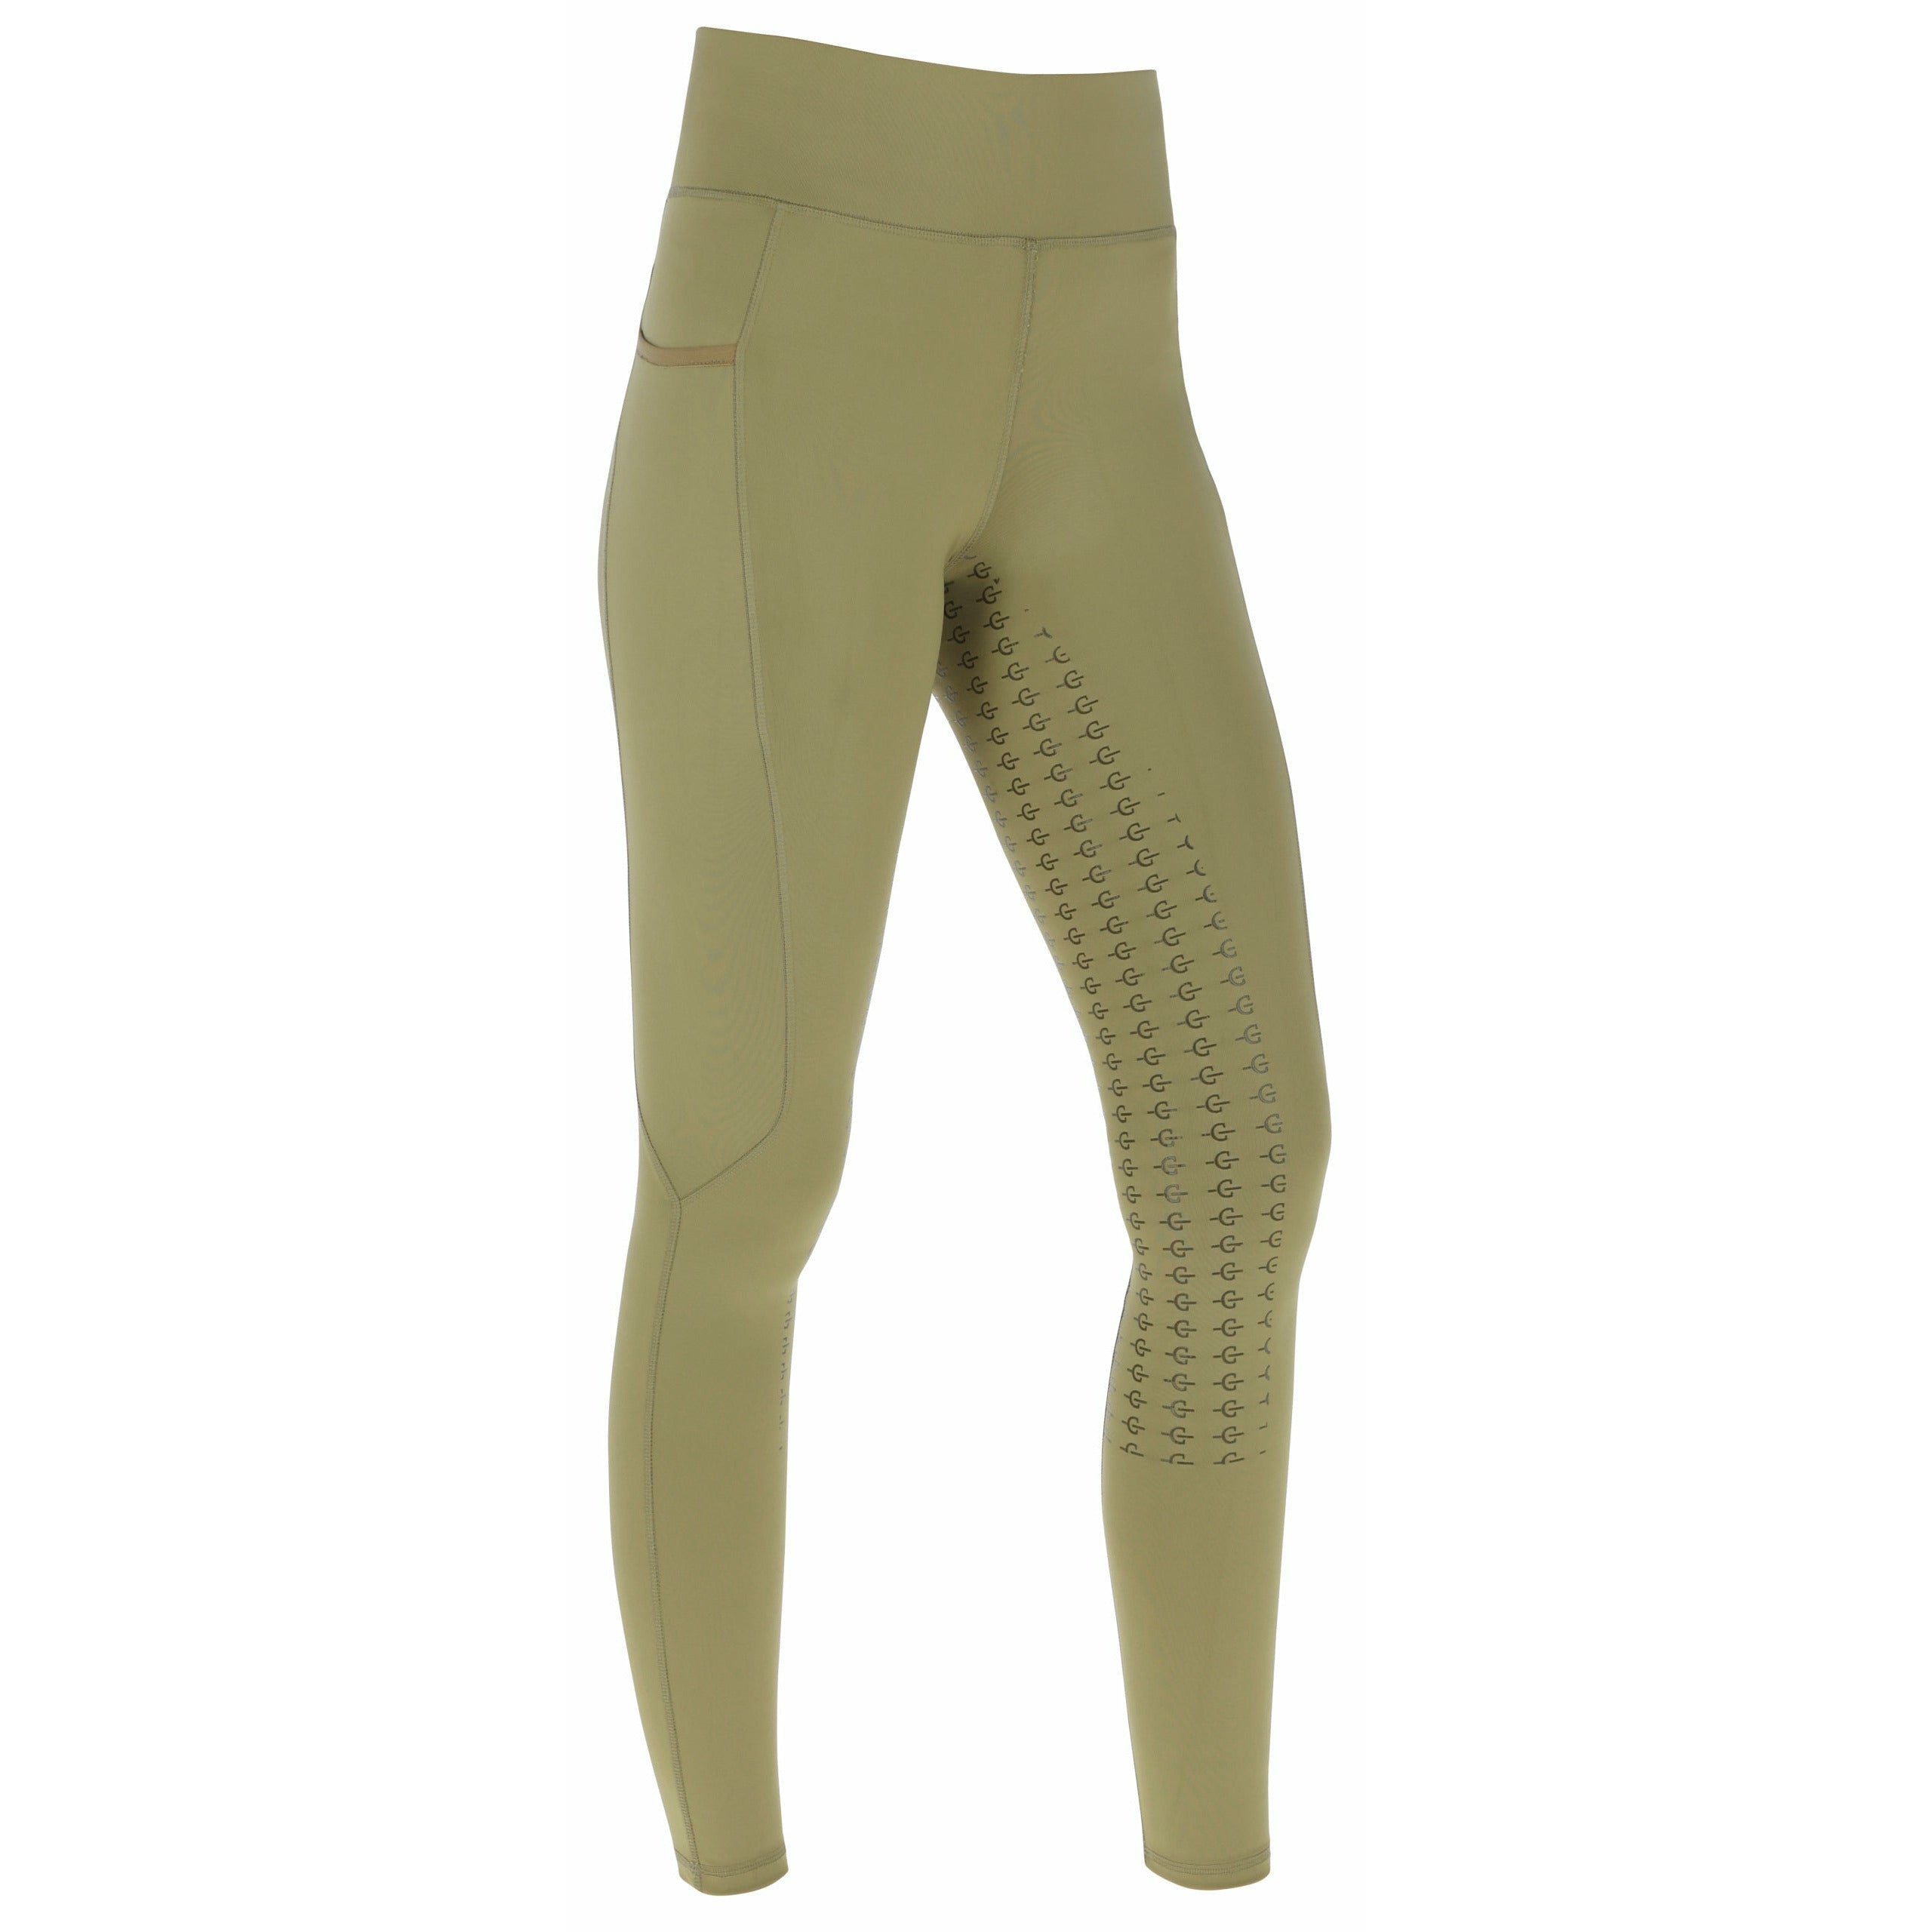 Covalliero Full Seat Kids Riding Tights - only age 8-9 left